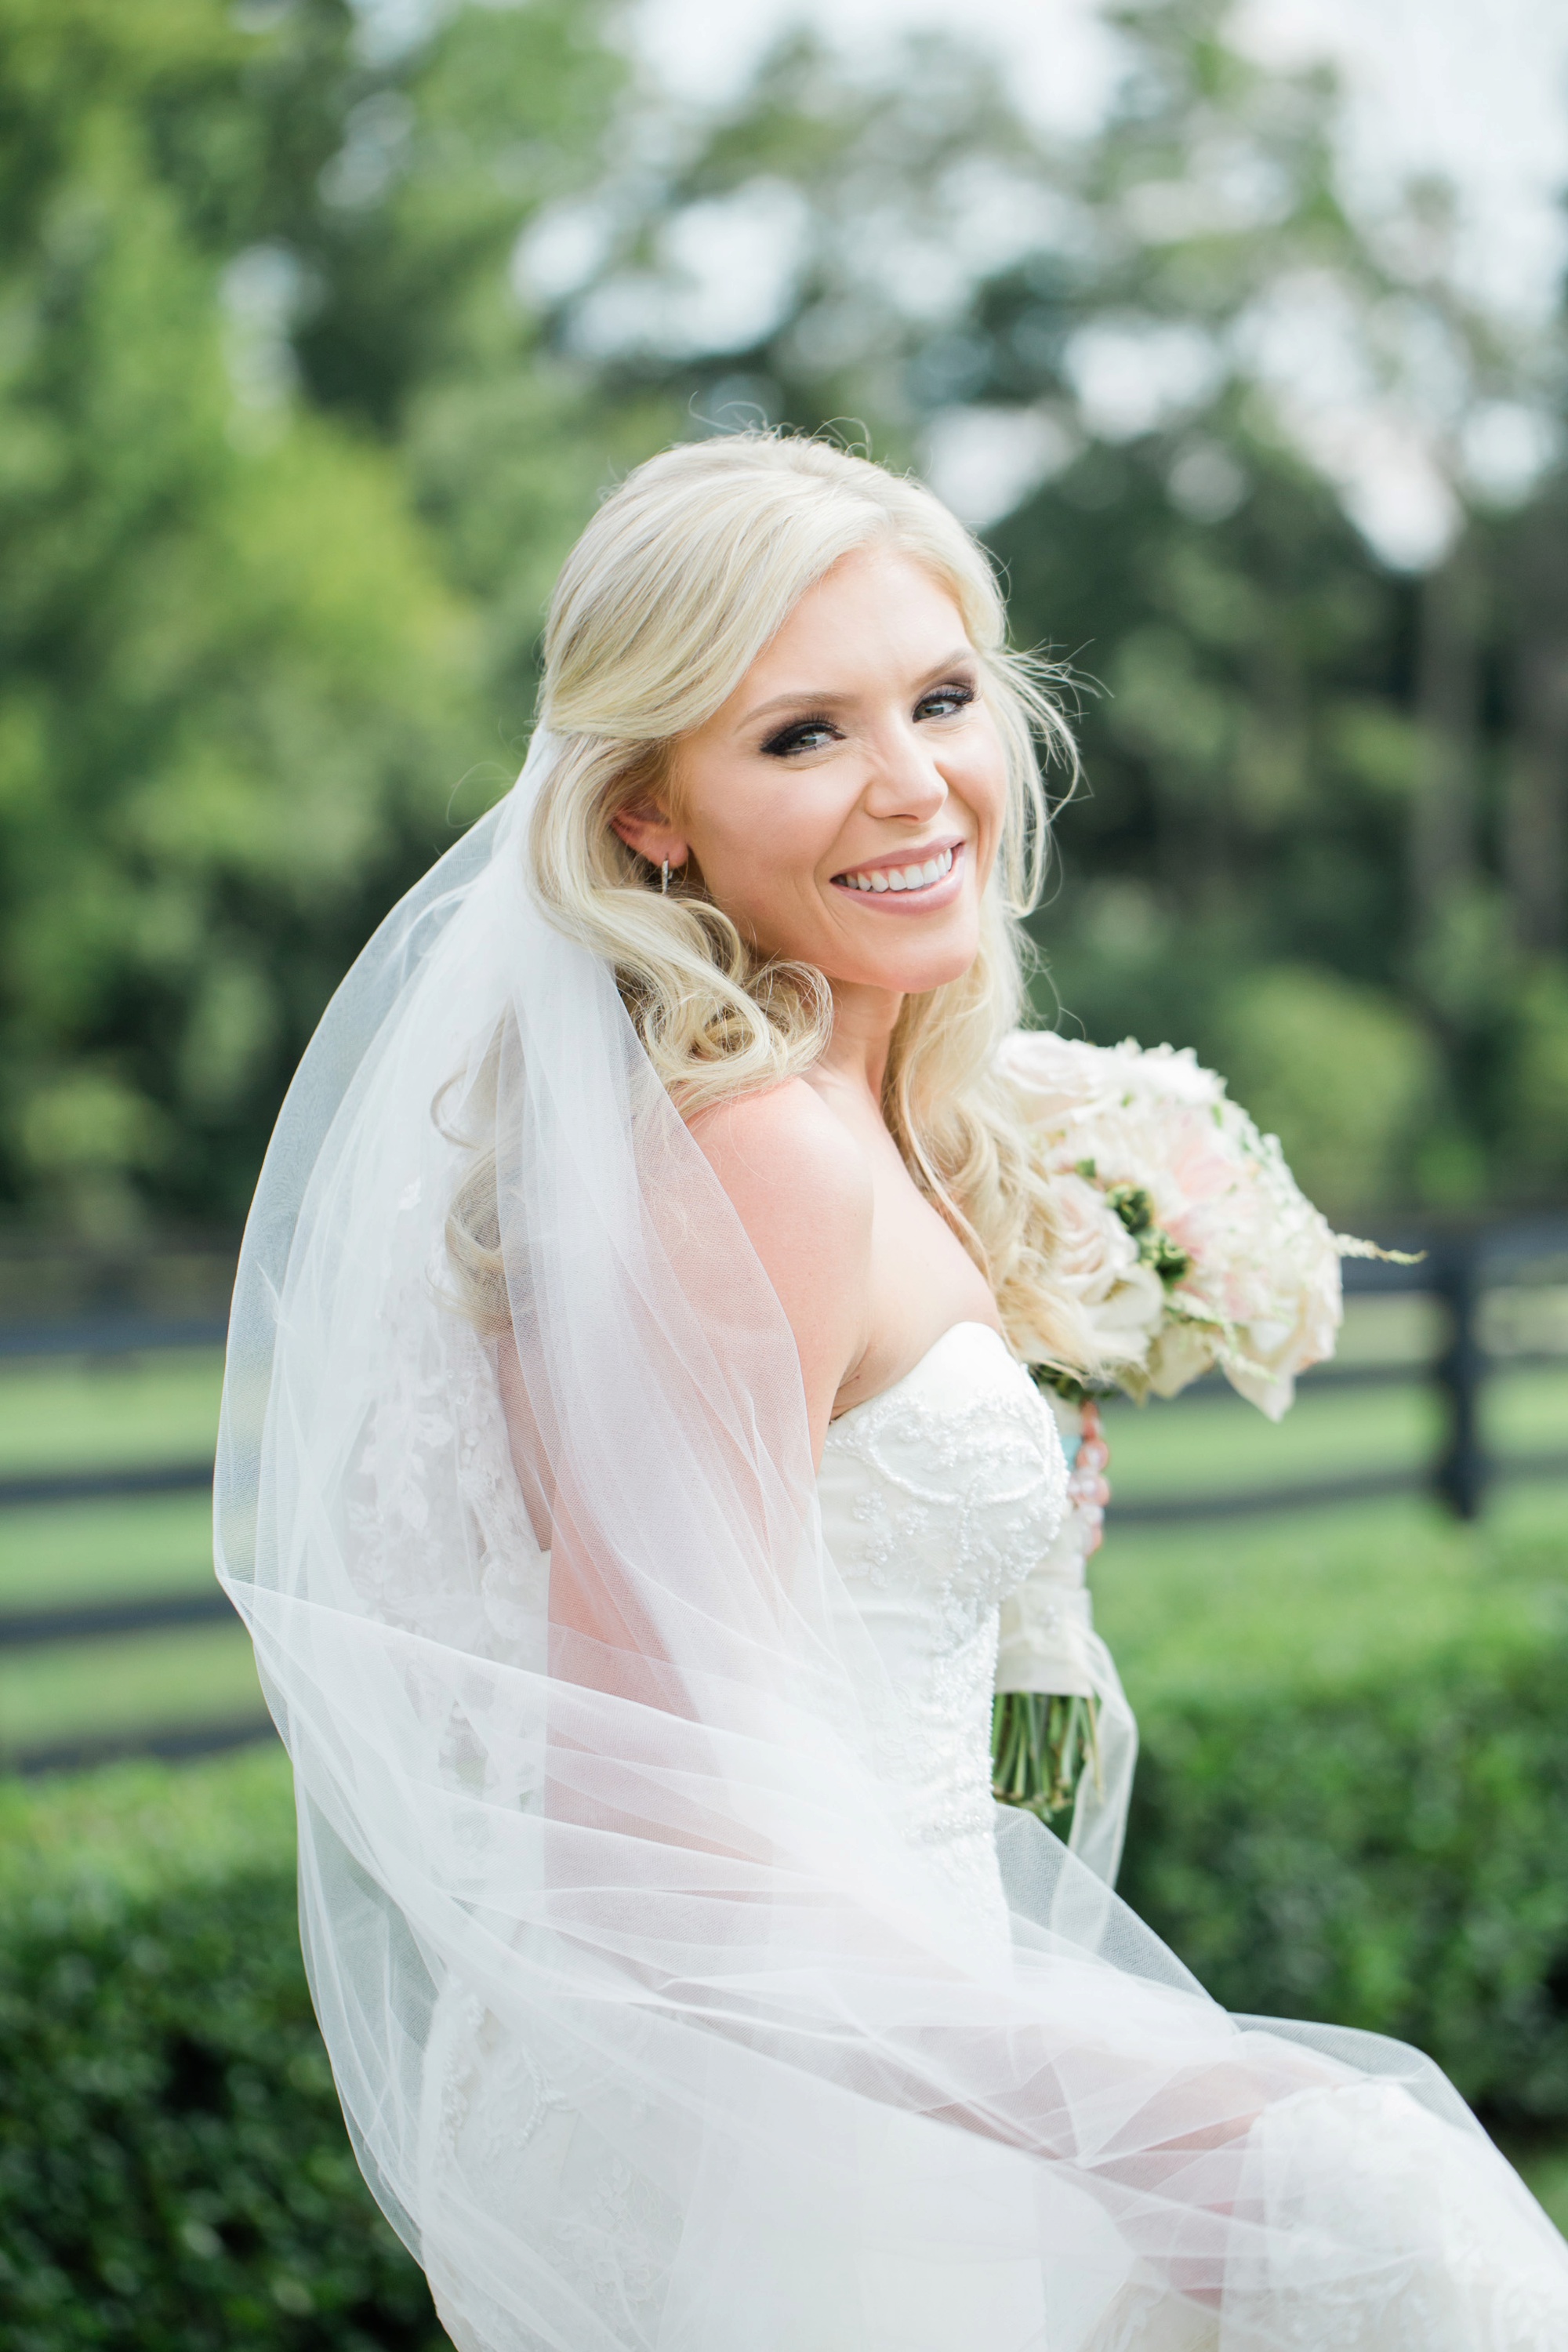 This bridal portrait is nothing but pure joy in a photo. I don't think I've come across a bride so excited about wedding photography. Photo by luxury destination wedding photographer Rebecca Cerasani